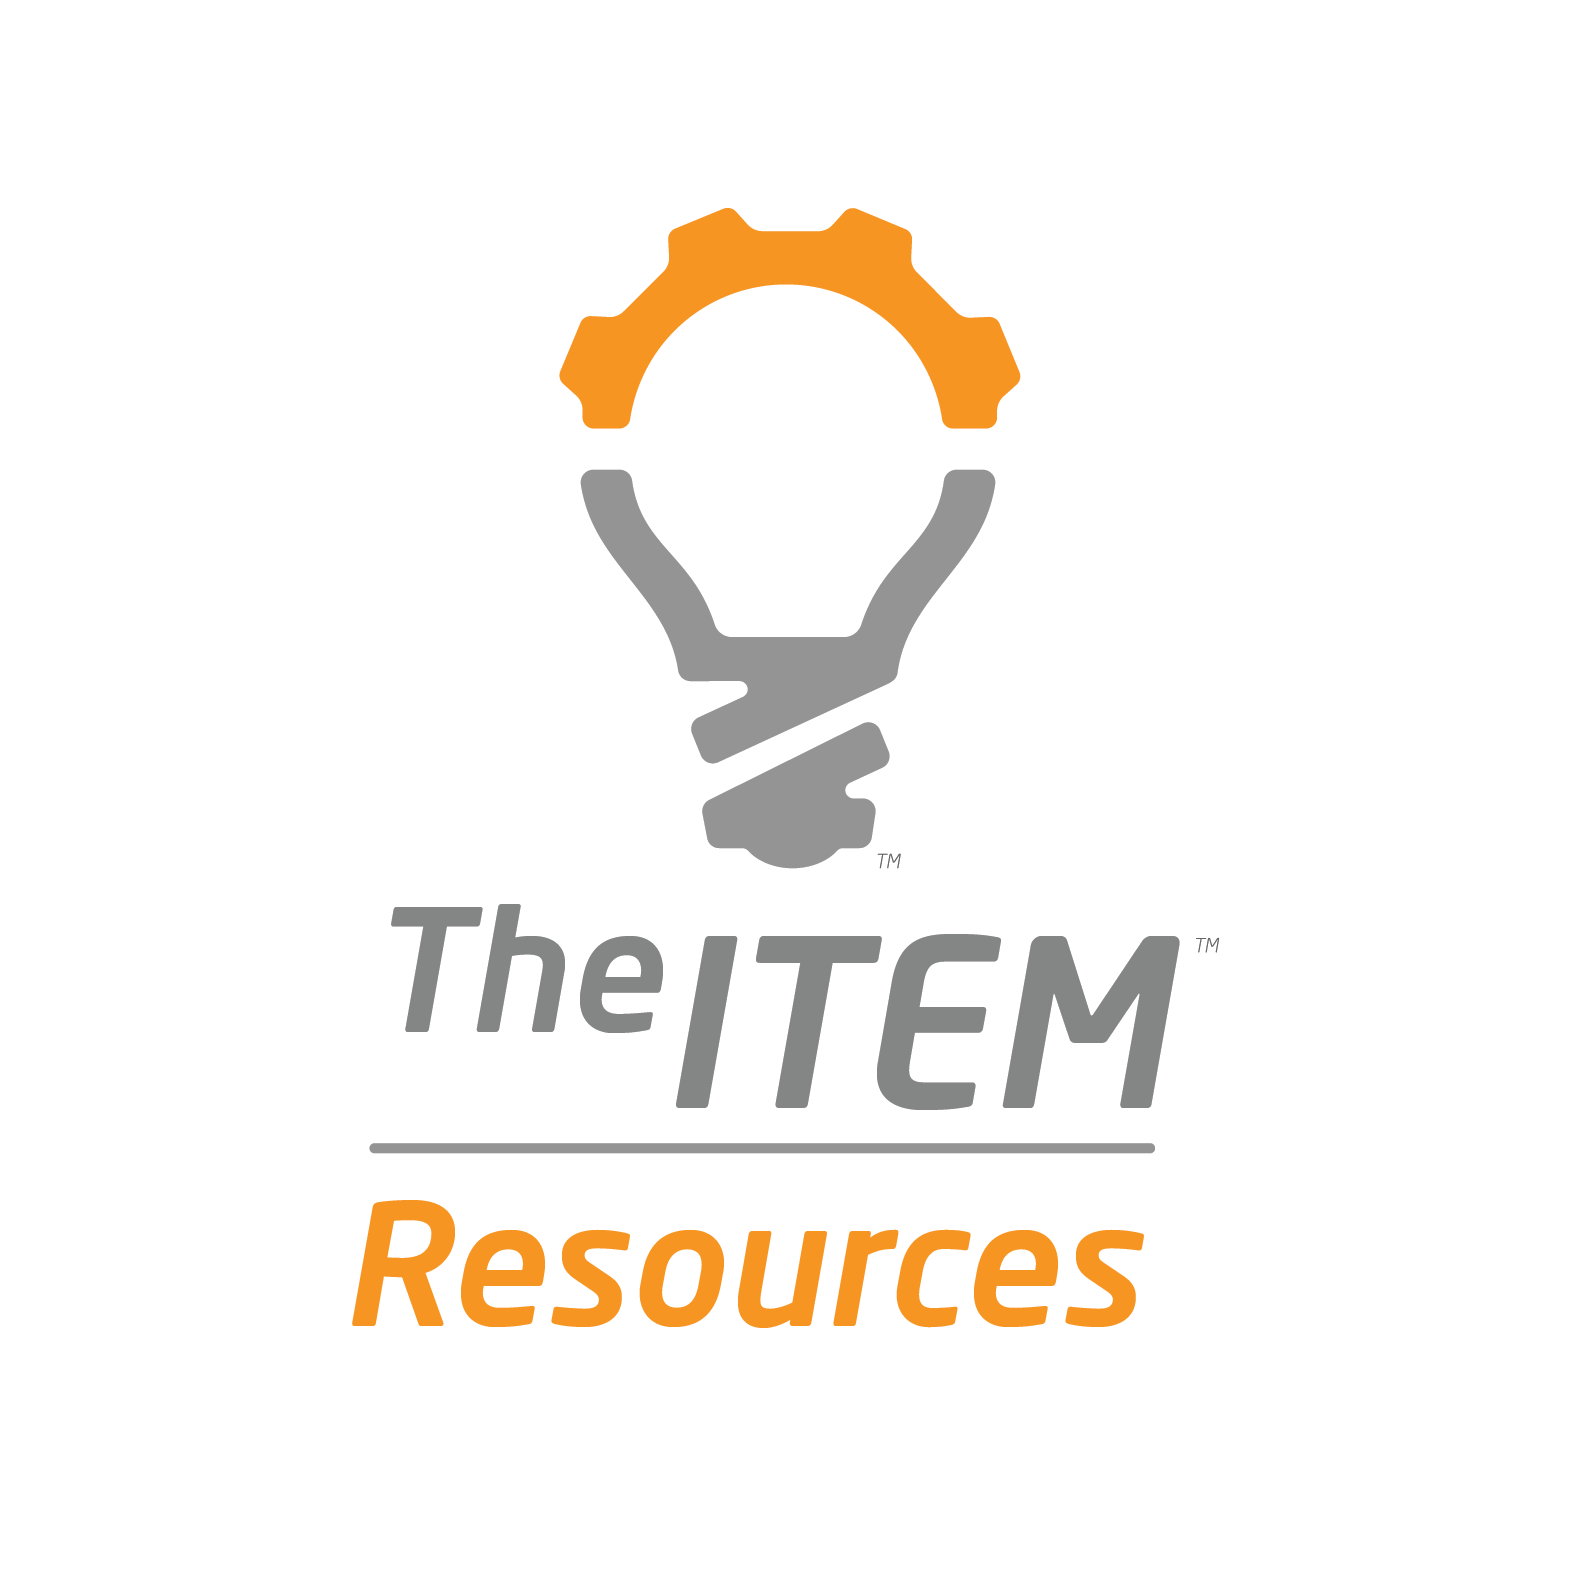 The ITEM Resources